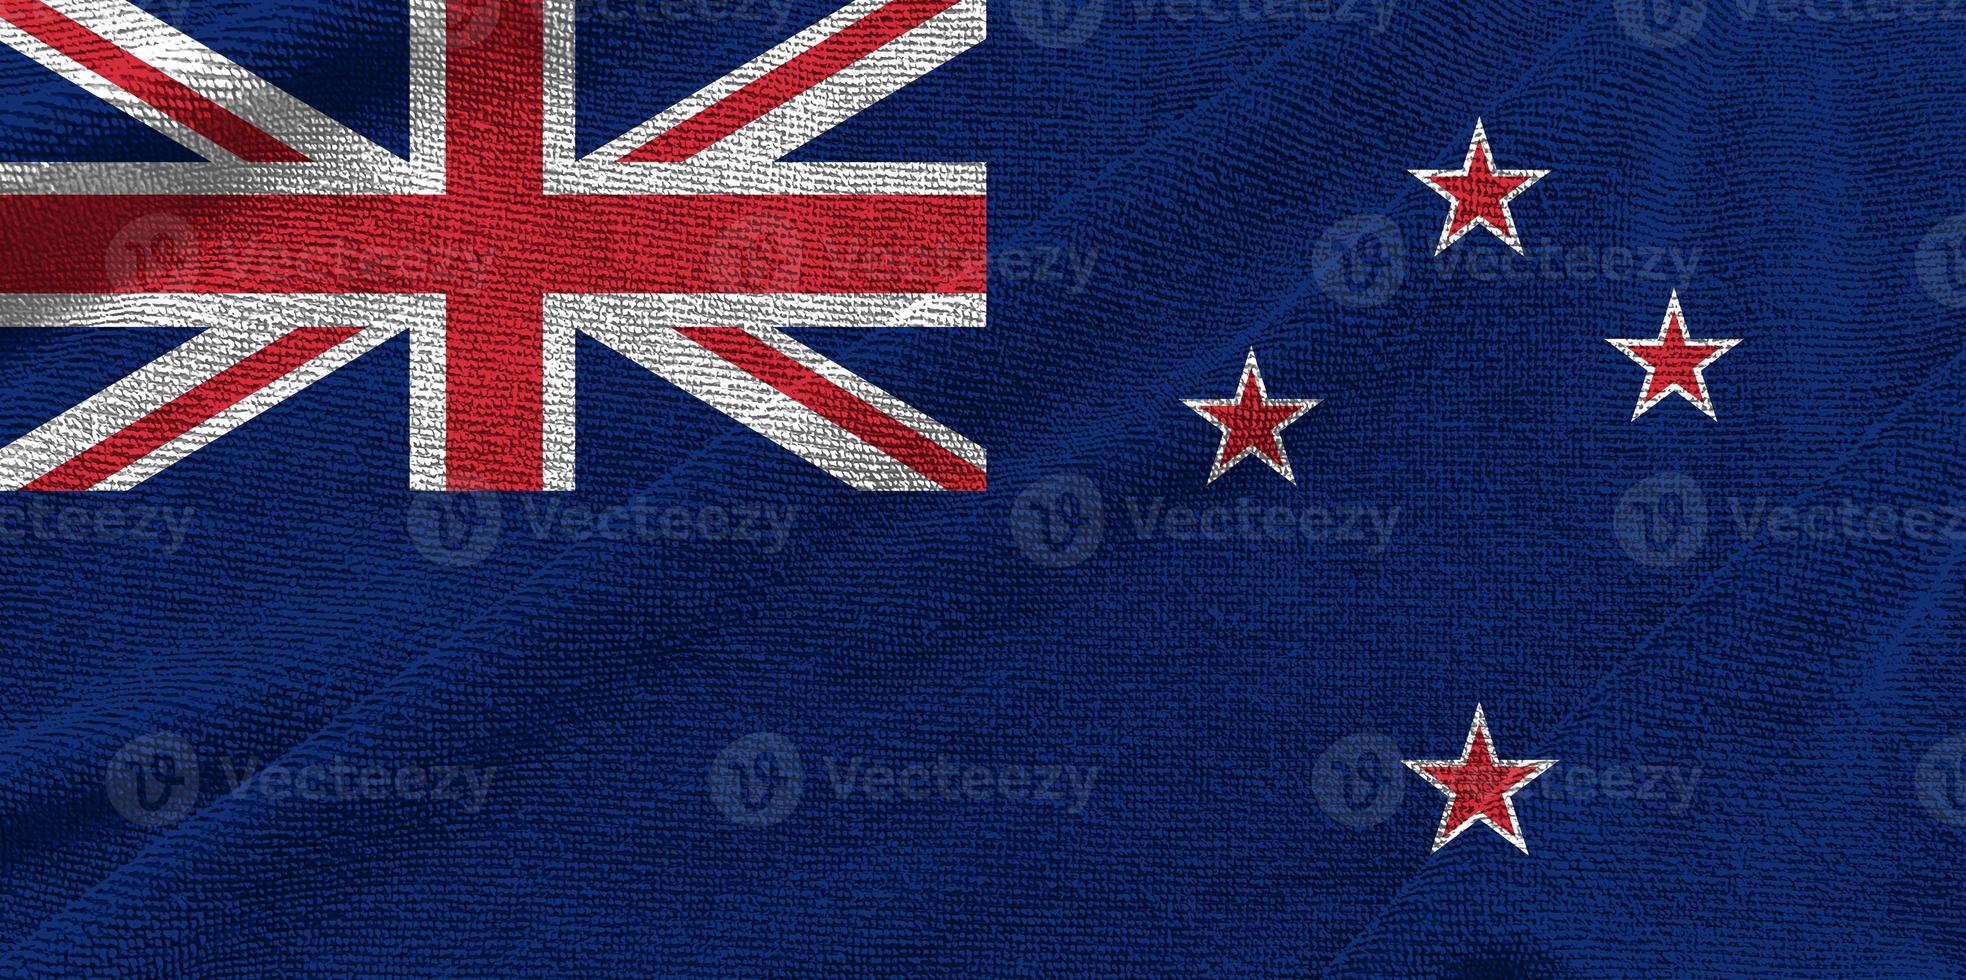 New Zealand flag wave isolated  on png or transparent  background,Symbols of New Zealand , template for banner,card,advertising ,promote, TV commercial, ads, web design, illustration photo